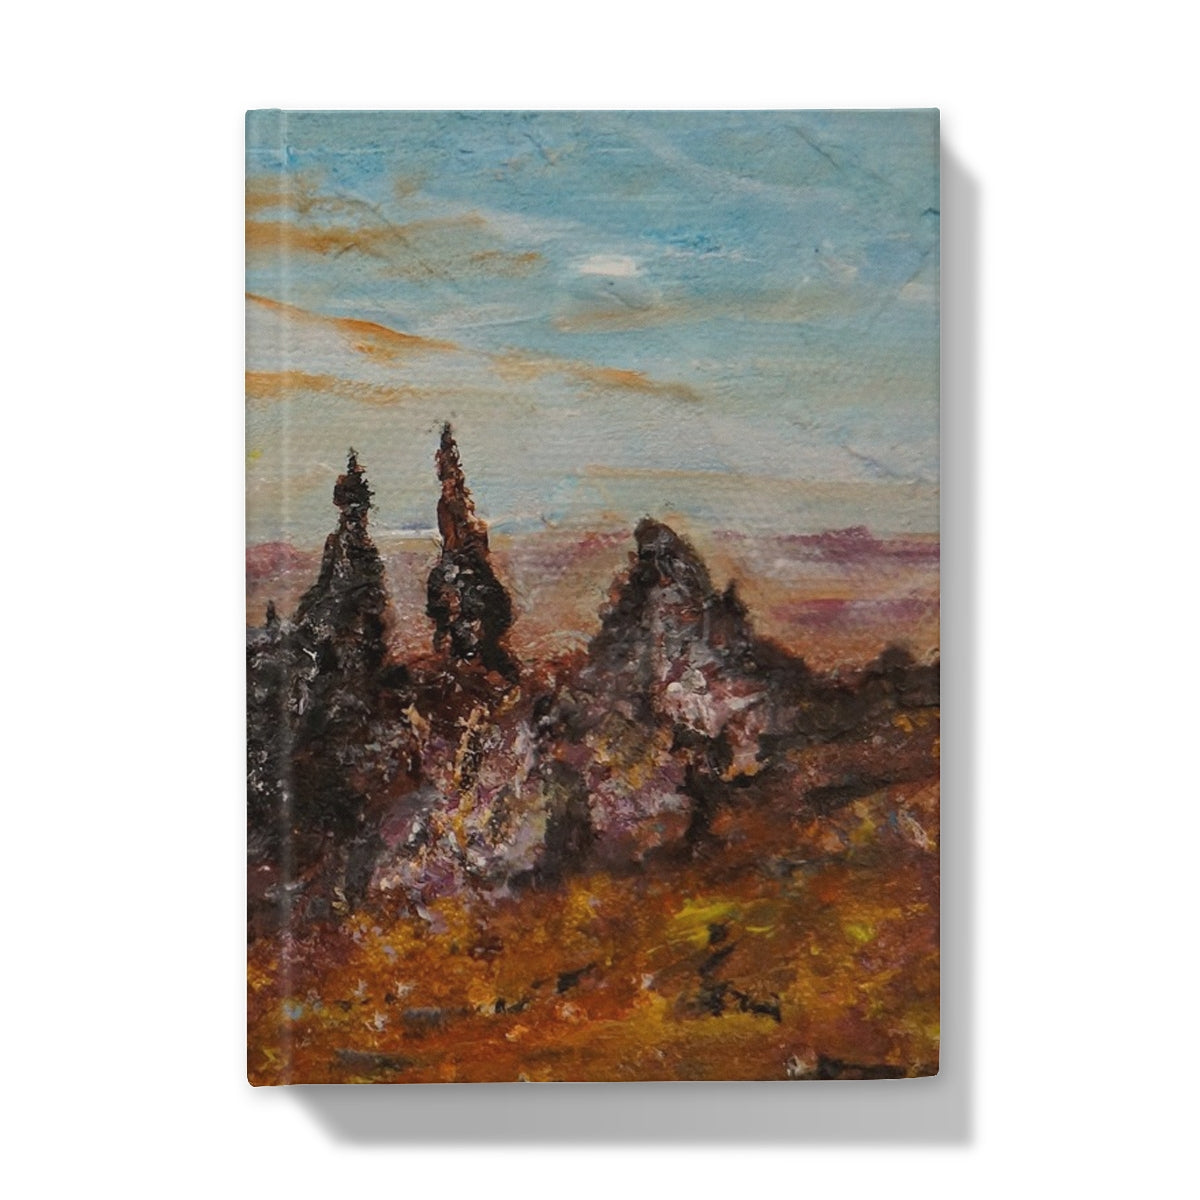 The Old Man Of Storr Skye Art Gifts Hardback Journal-Journals & Notebooks-Skye Art Gallery-5"x7"-Lined-Paintings, Prints, Homeware, Art Gifts From Scotland By Scottish Artist Kevin Hunter